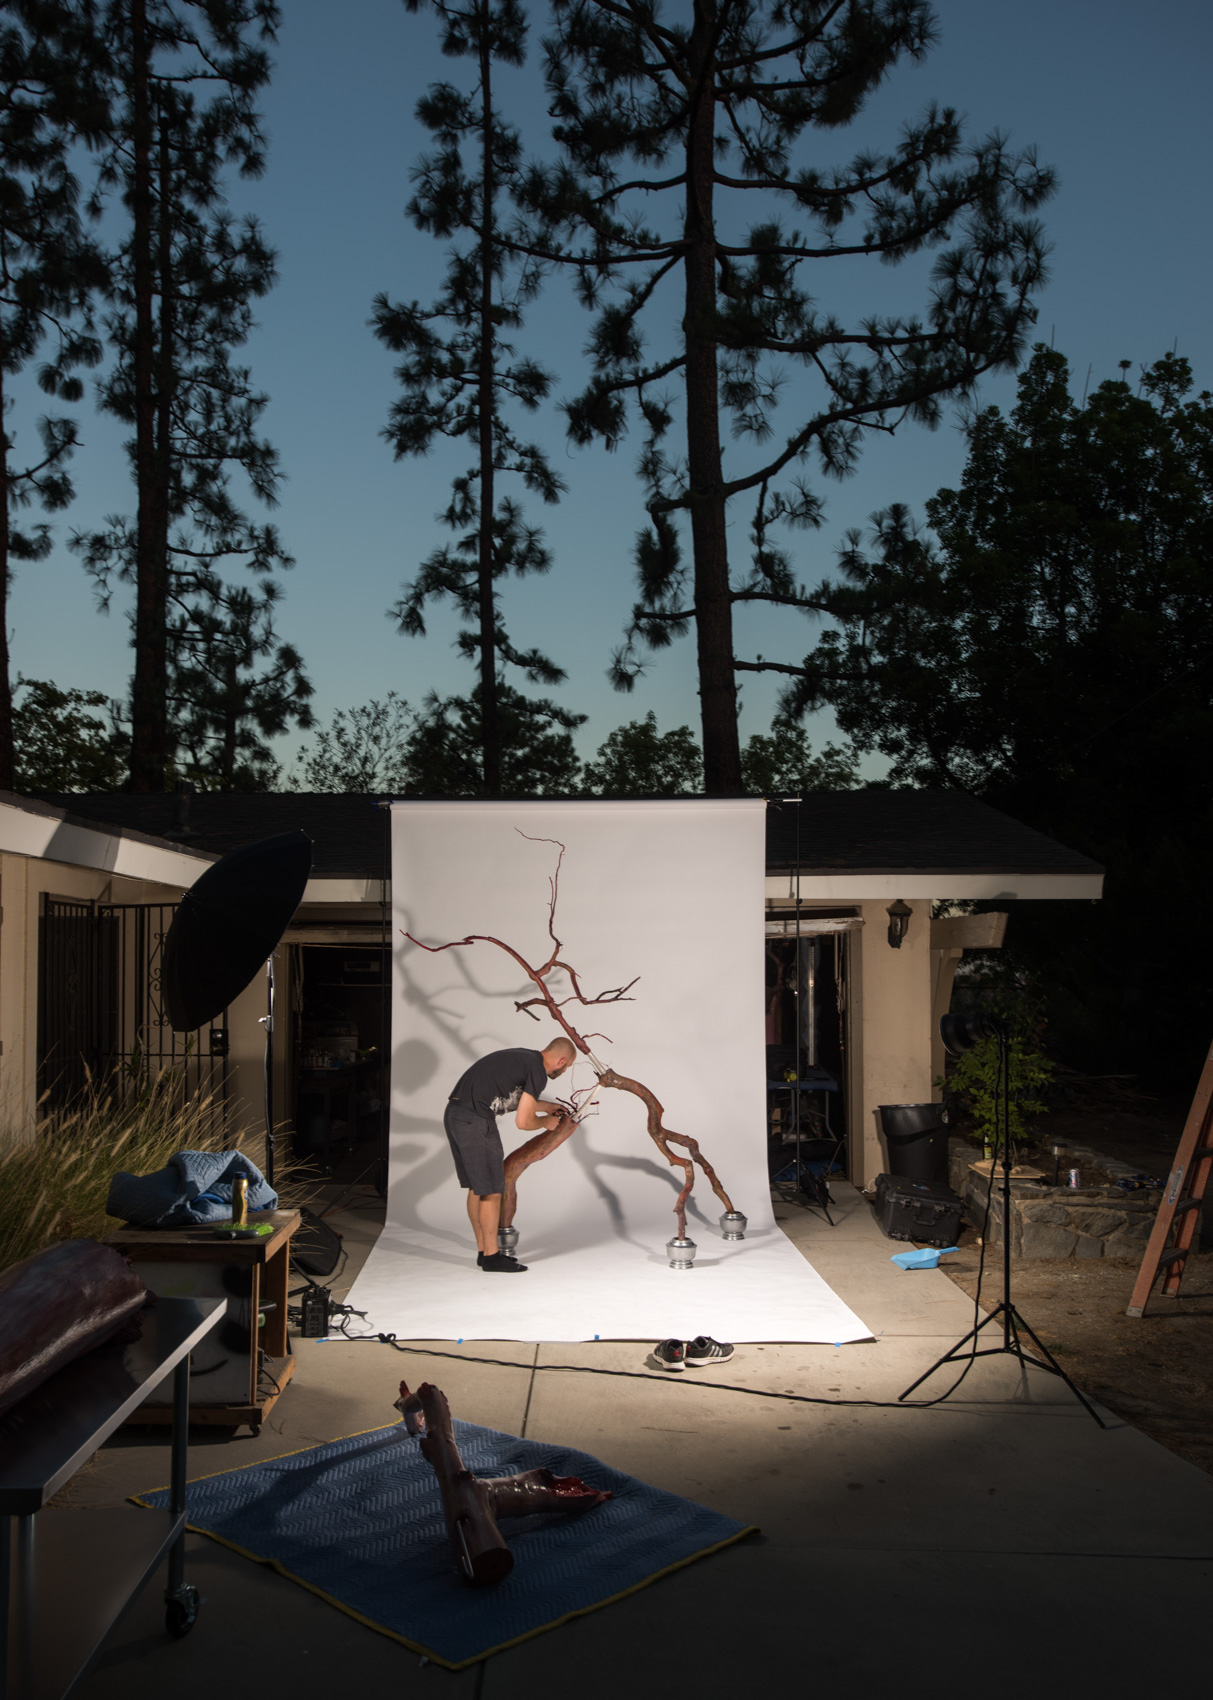 An artist works on a sculpture at his home studio in Pasadena, Calif.